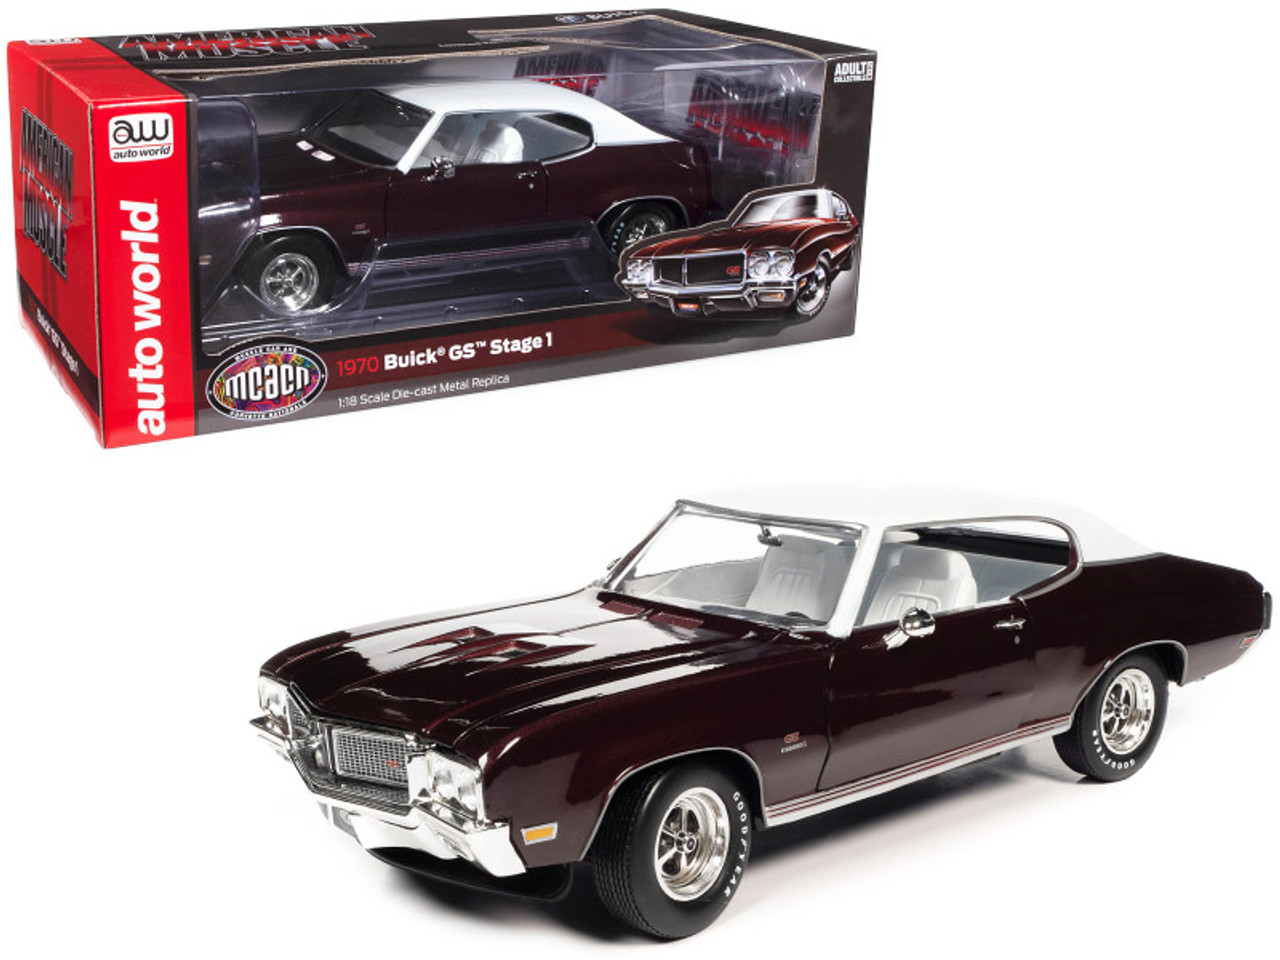 1970 Buick GS Stage 1 Burgundy Mist Metallic with White Top and Interior "Muscle Car & Corvette Nationals" (MCACN) 1/18 Diecast Model Car by Auto World